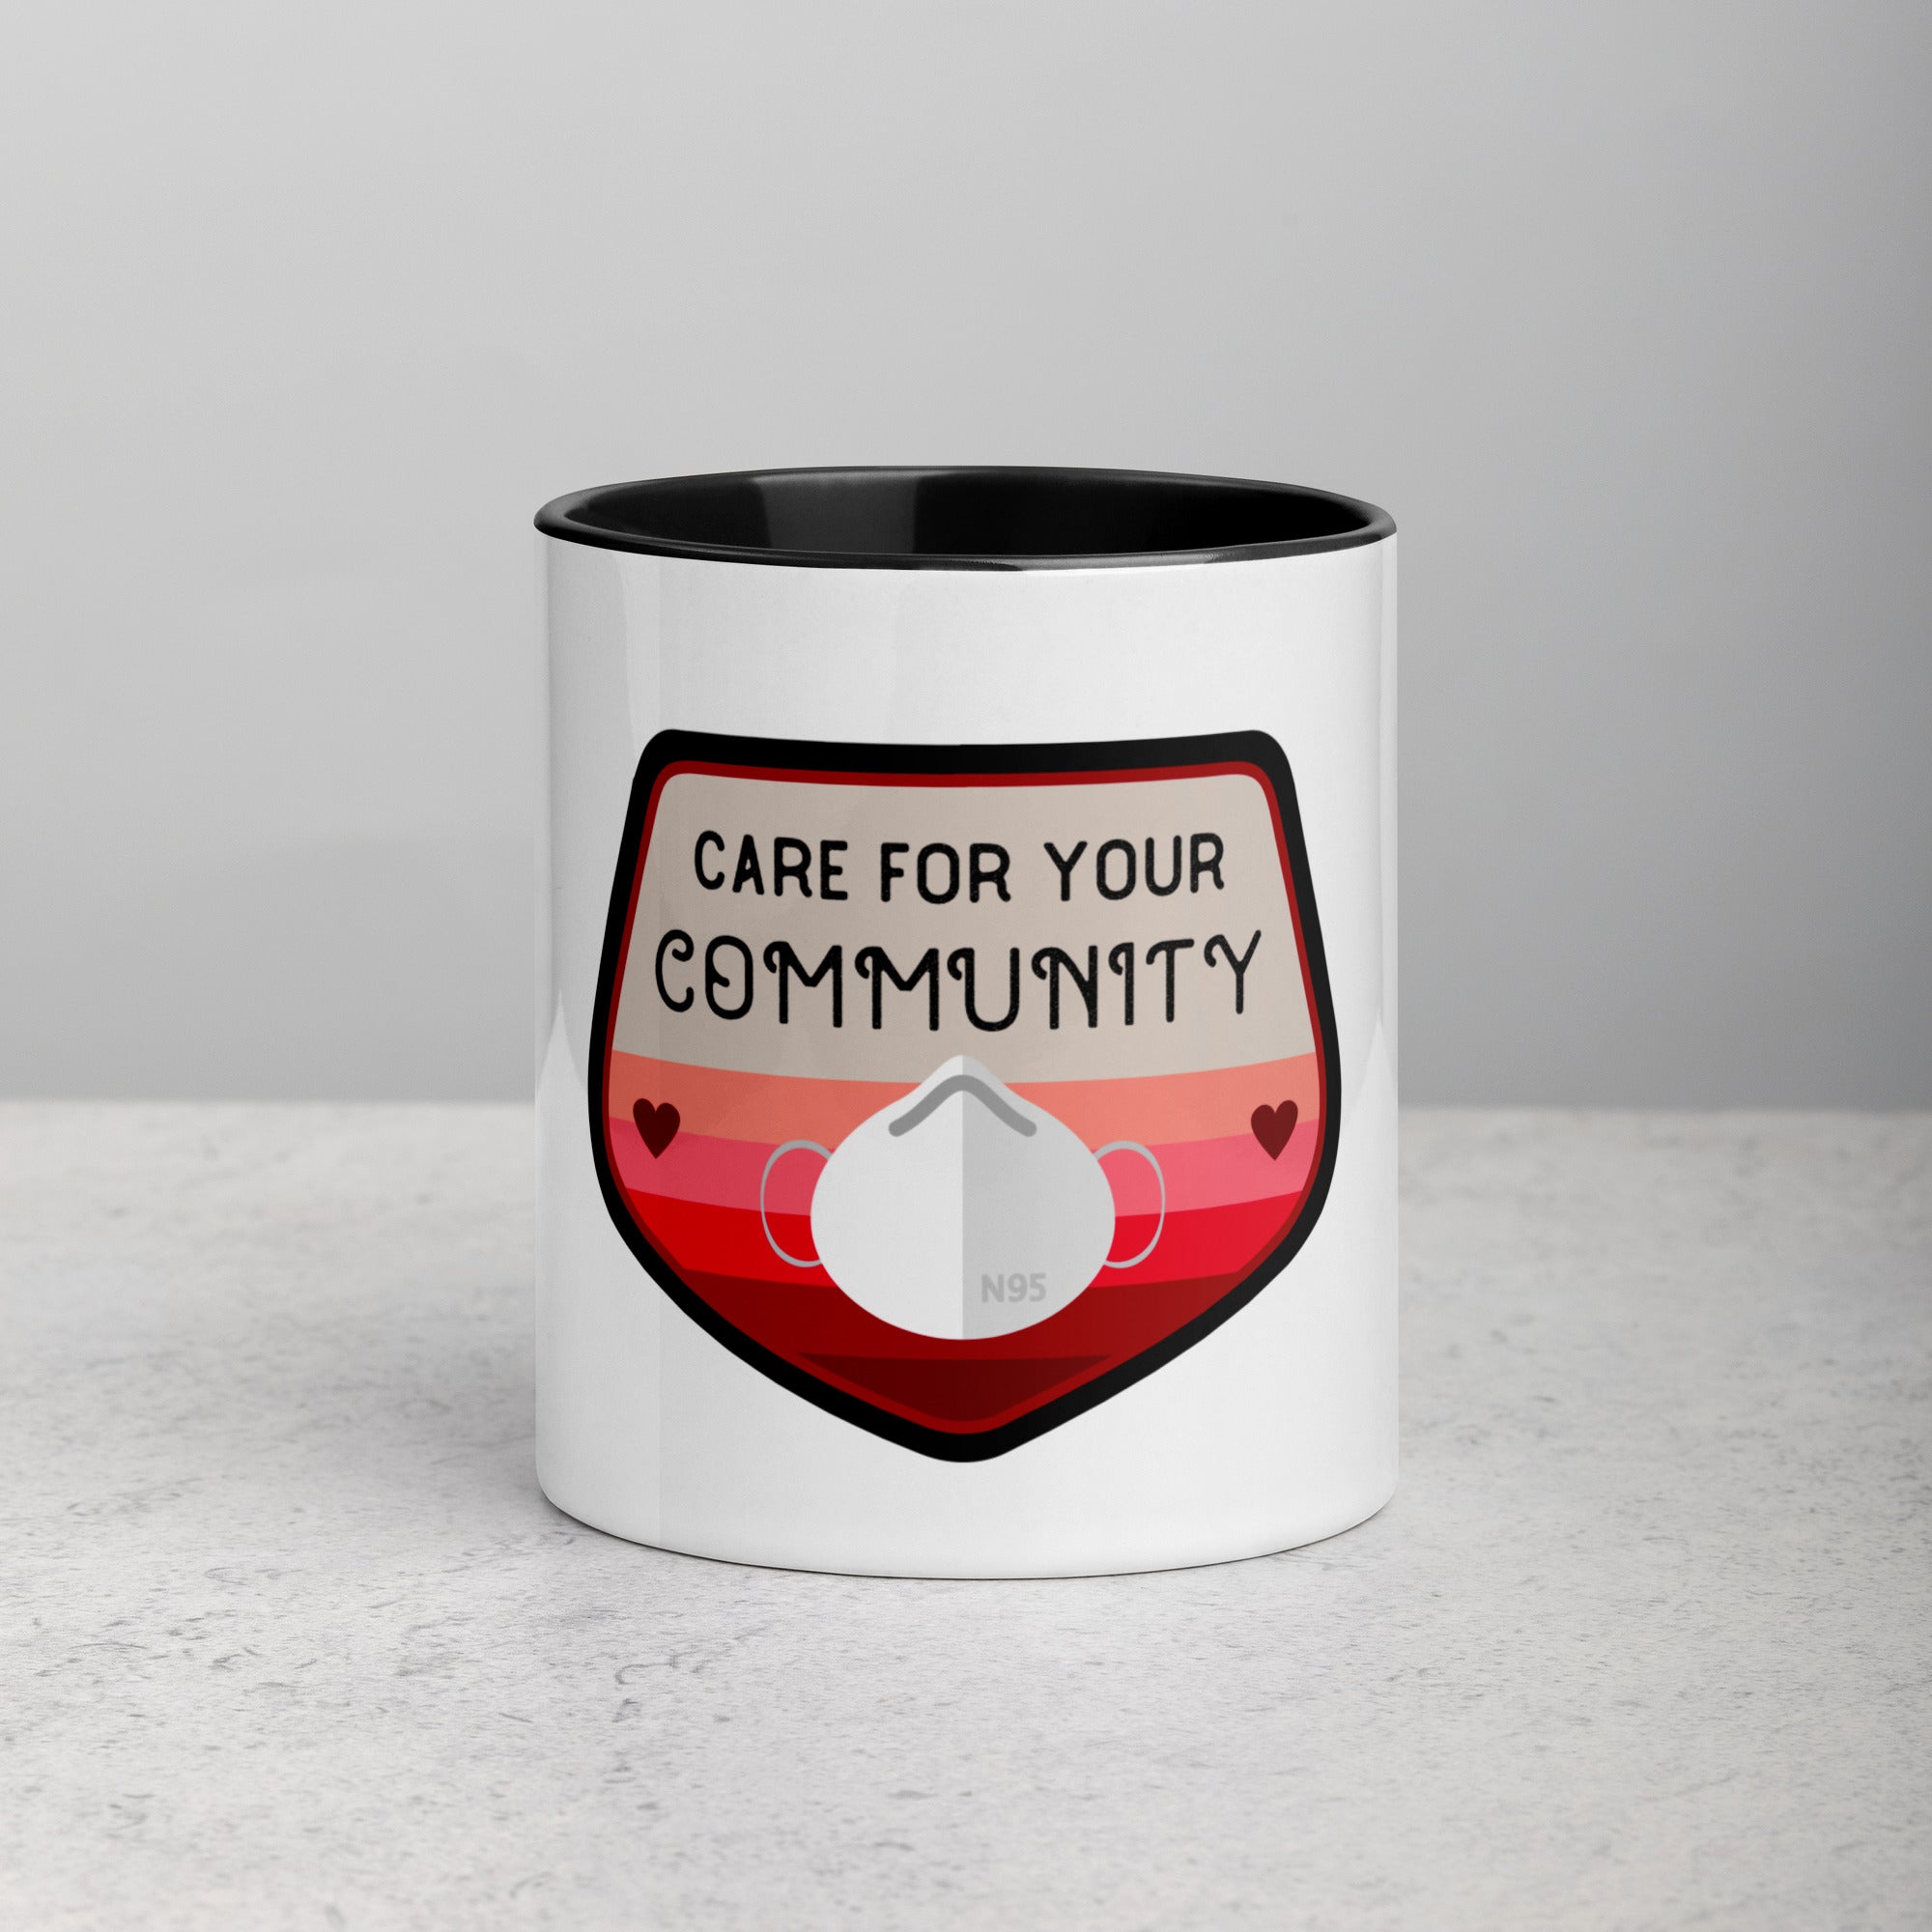 front facing white mug with black interior and handle. Mug has image with n95 mask and Care for your community